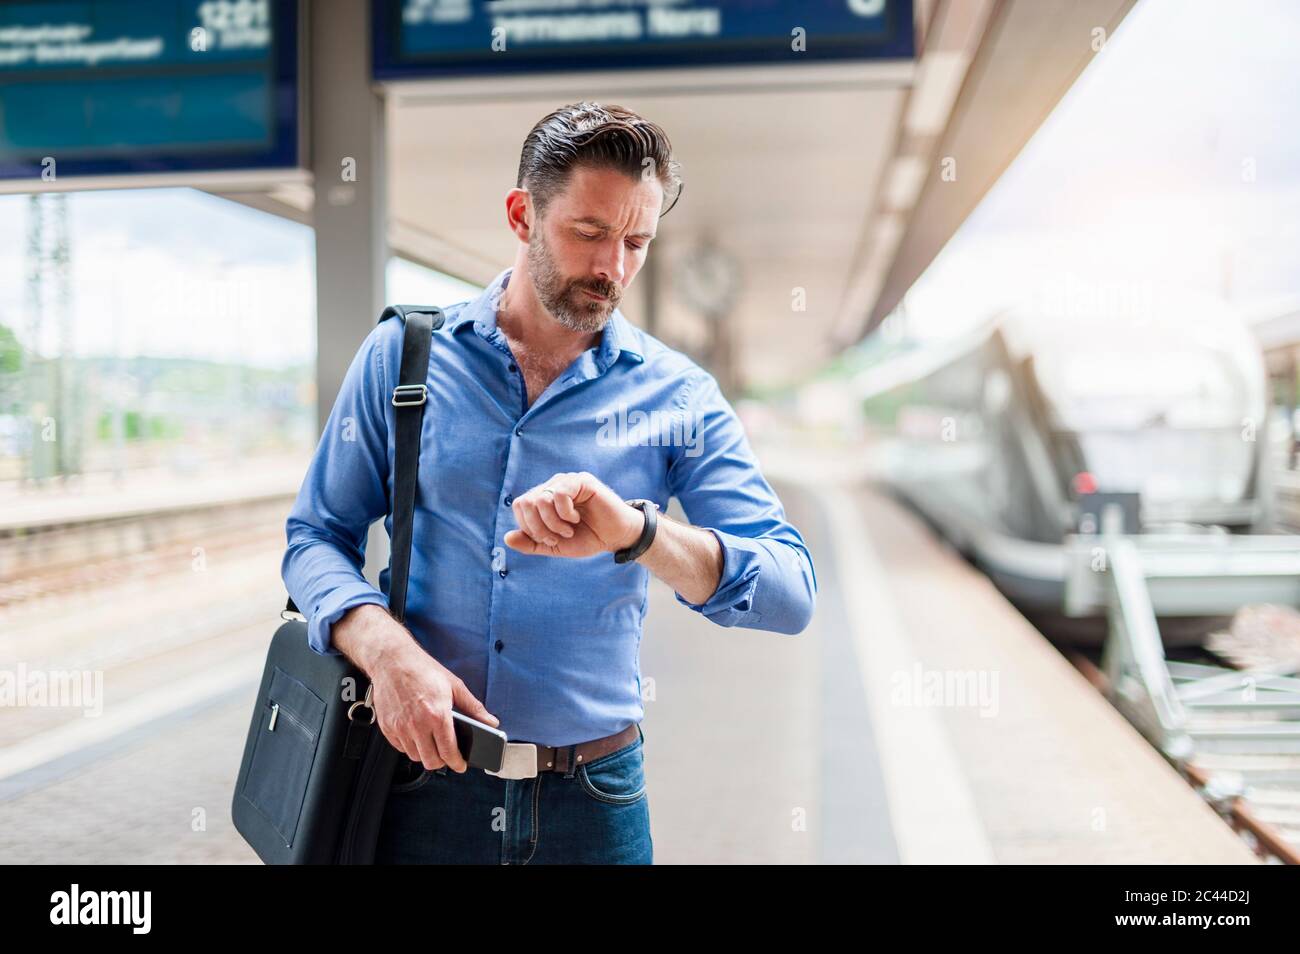 Bearded commuter looking at wristwatch while standing railroad station platform Stock Photo